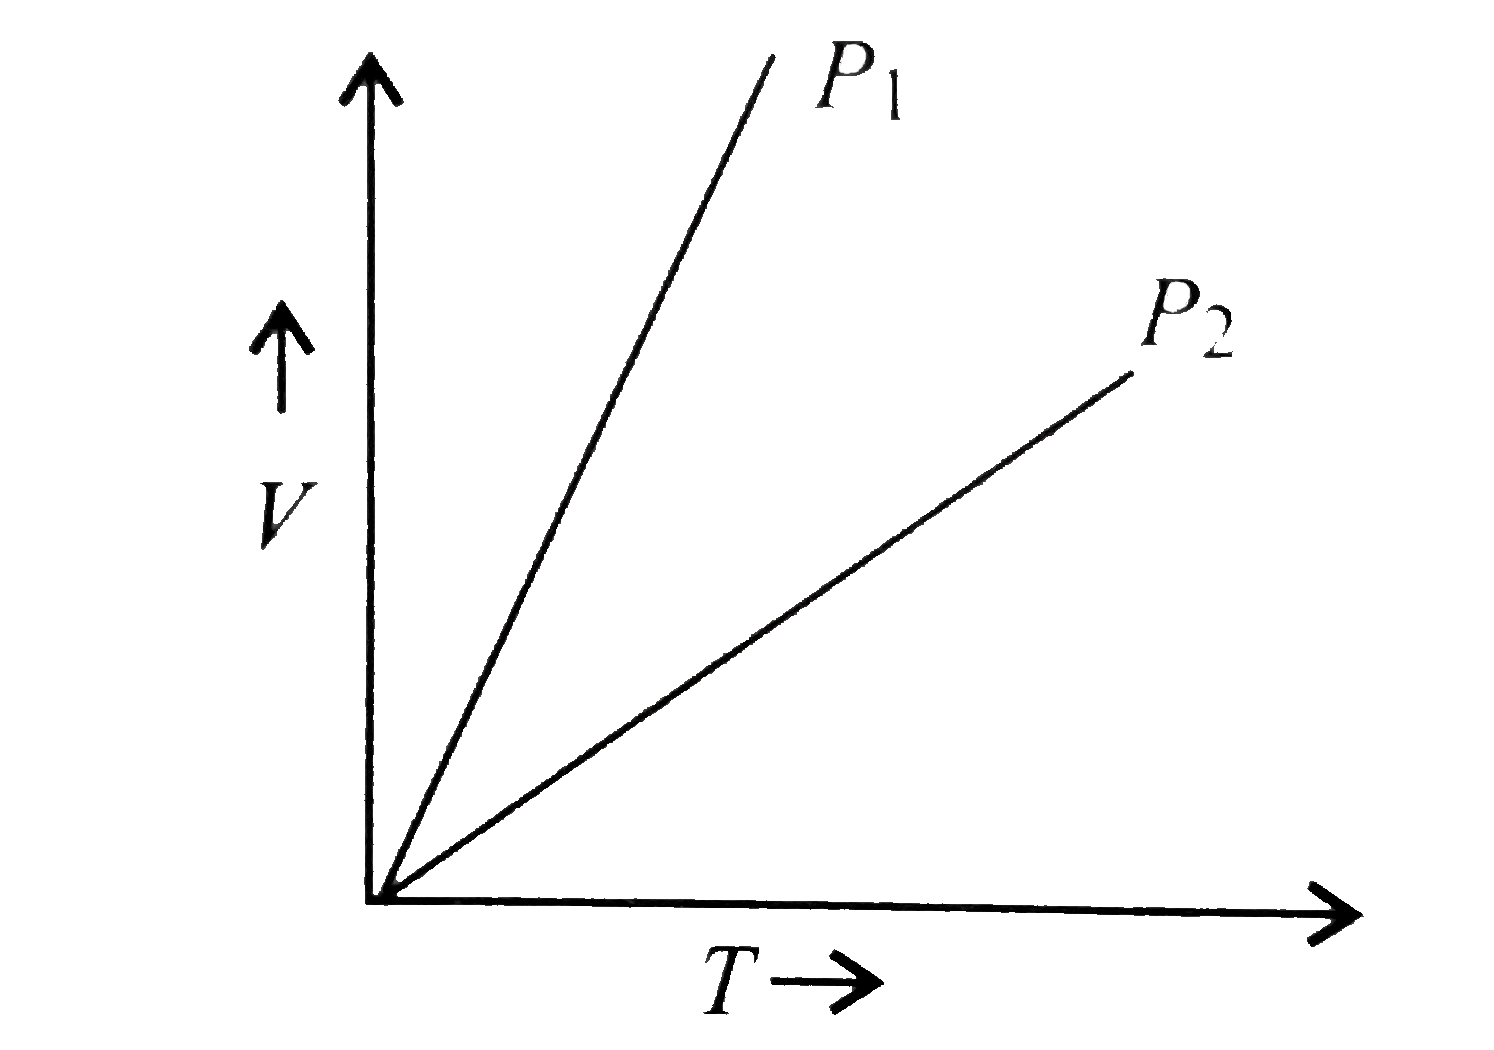 V vs T curves at different pressures P(1) and P(2) for an ideal gas are shown below:       Which one of the following is correct?